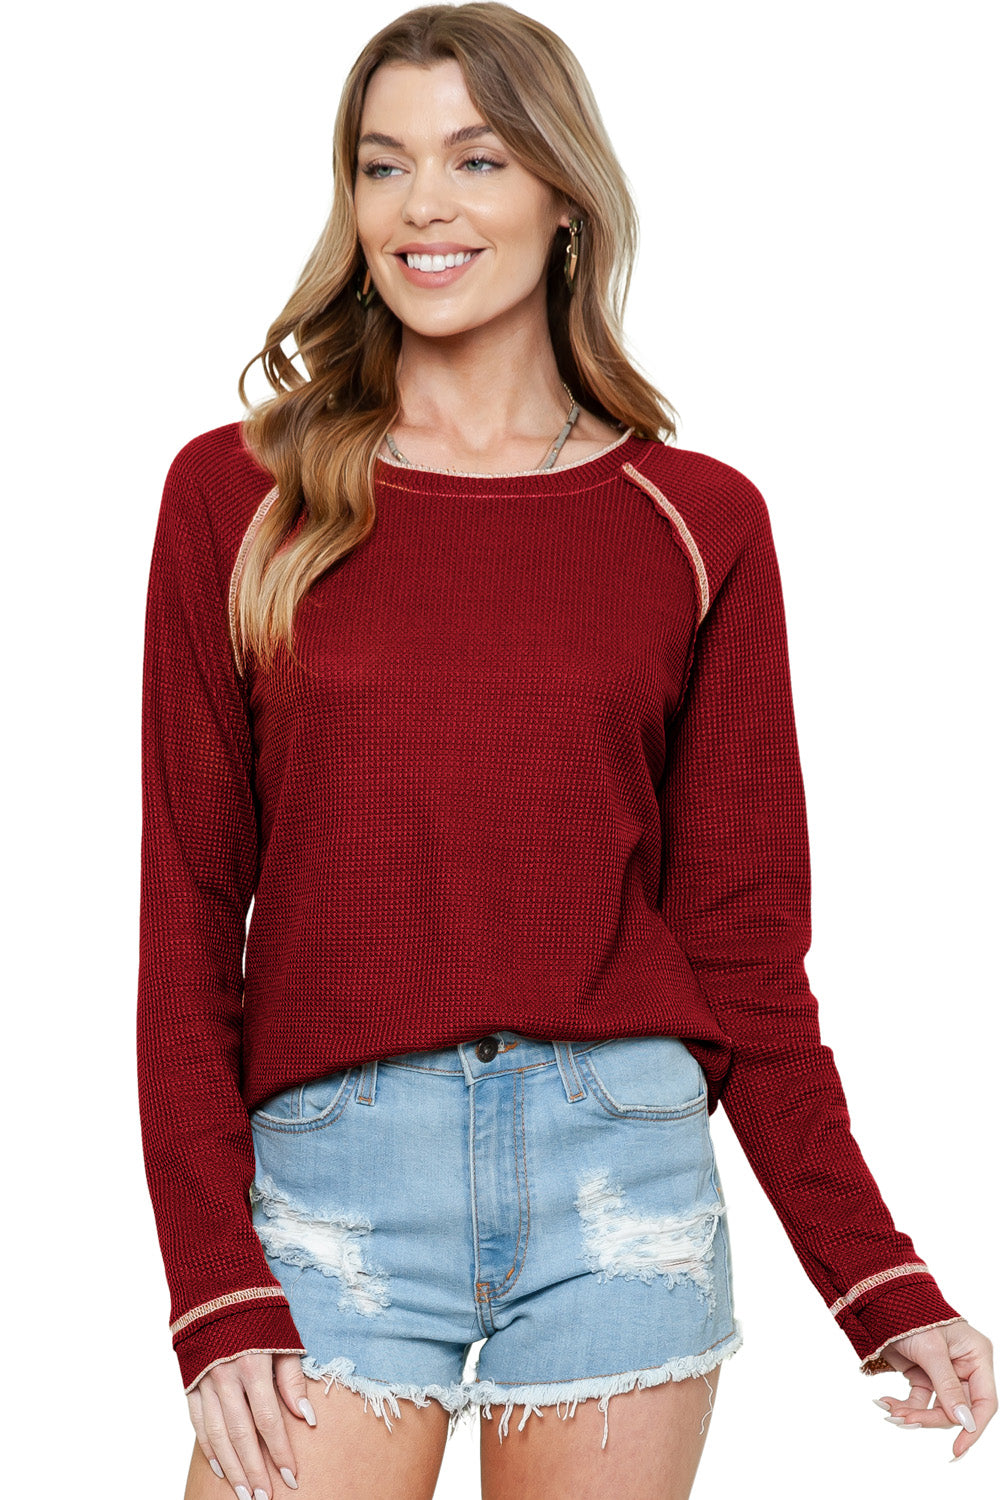 Red Exposed Seam Textured Pullover Long Sleeve Top